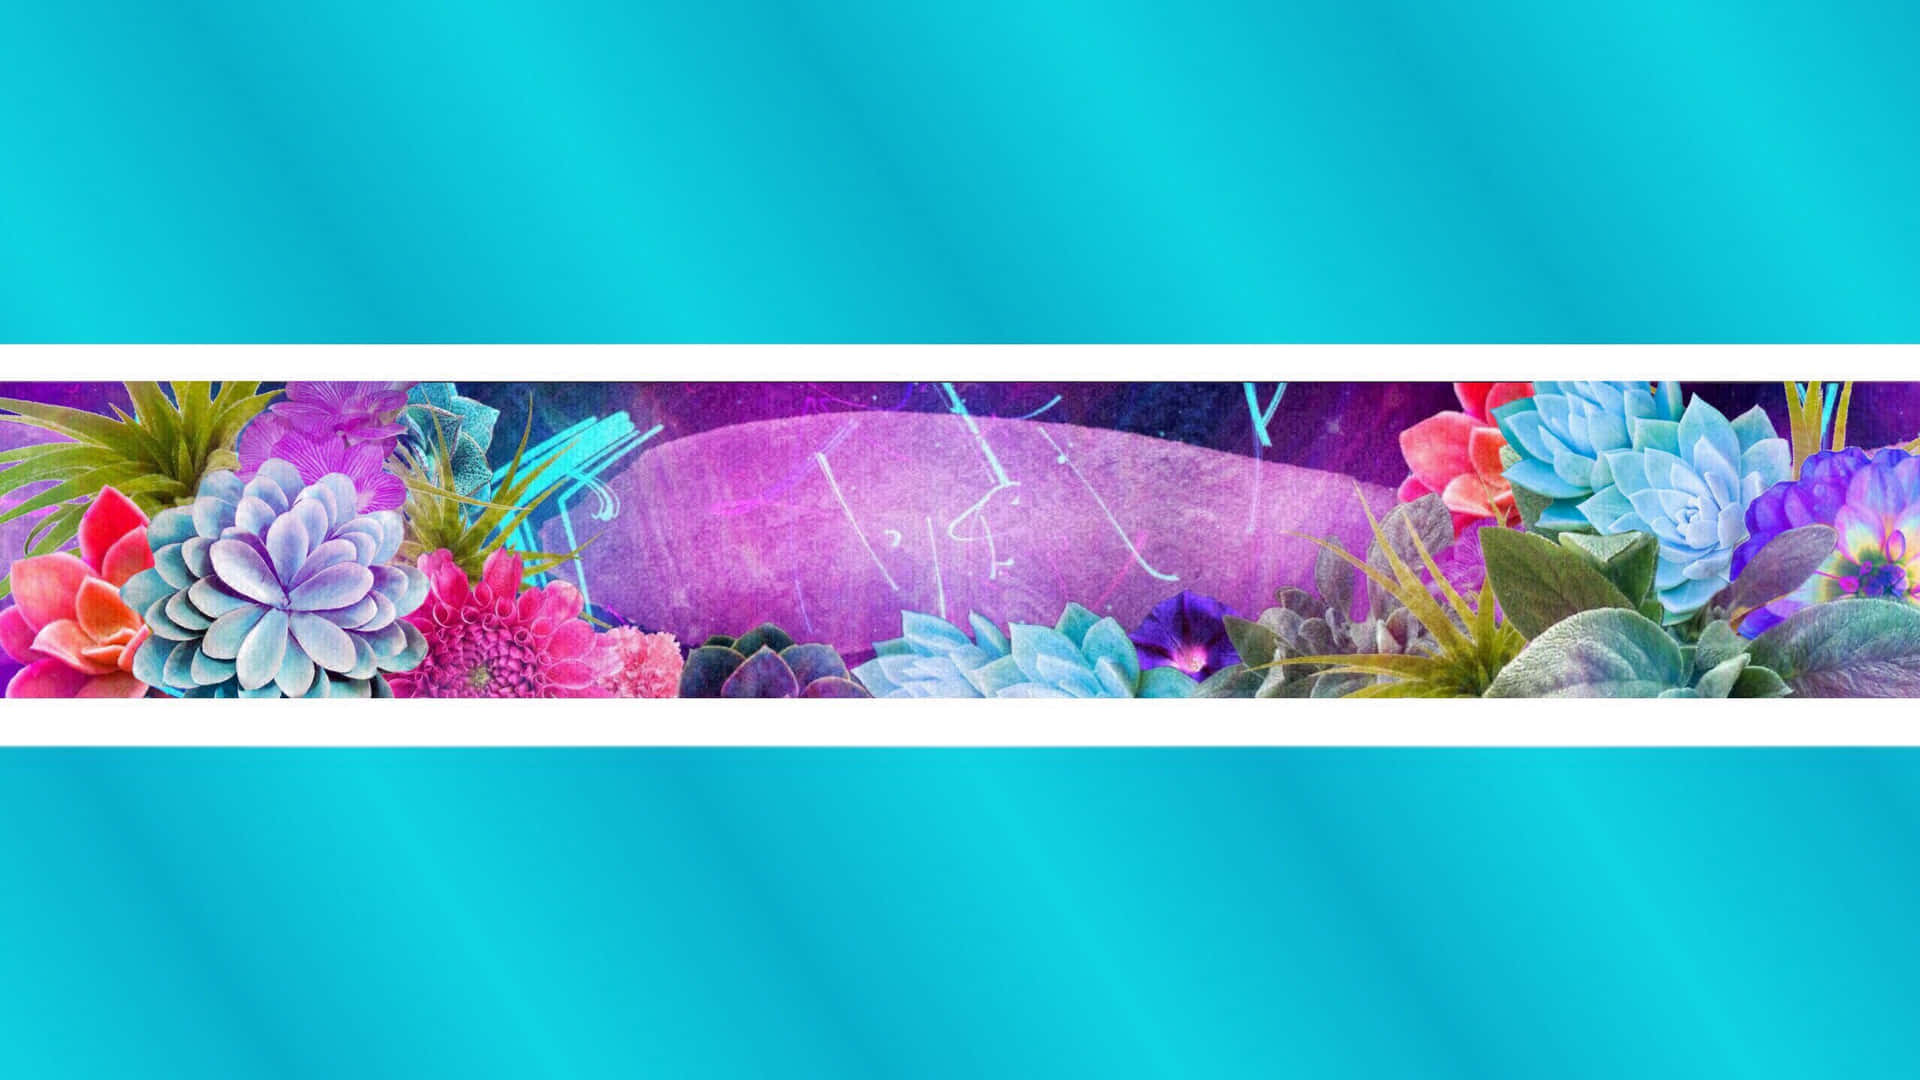 Aesthetic YouTube Banner Background - Professional and Eye-Catching